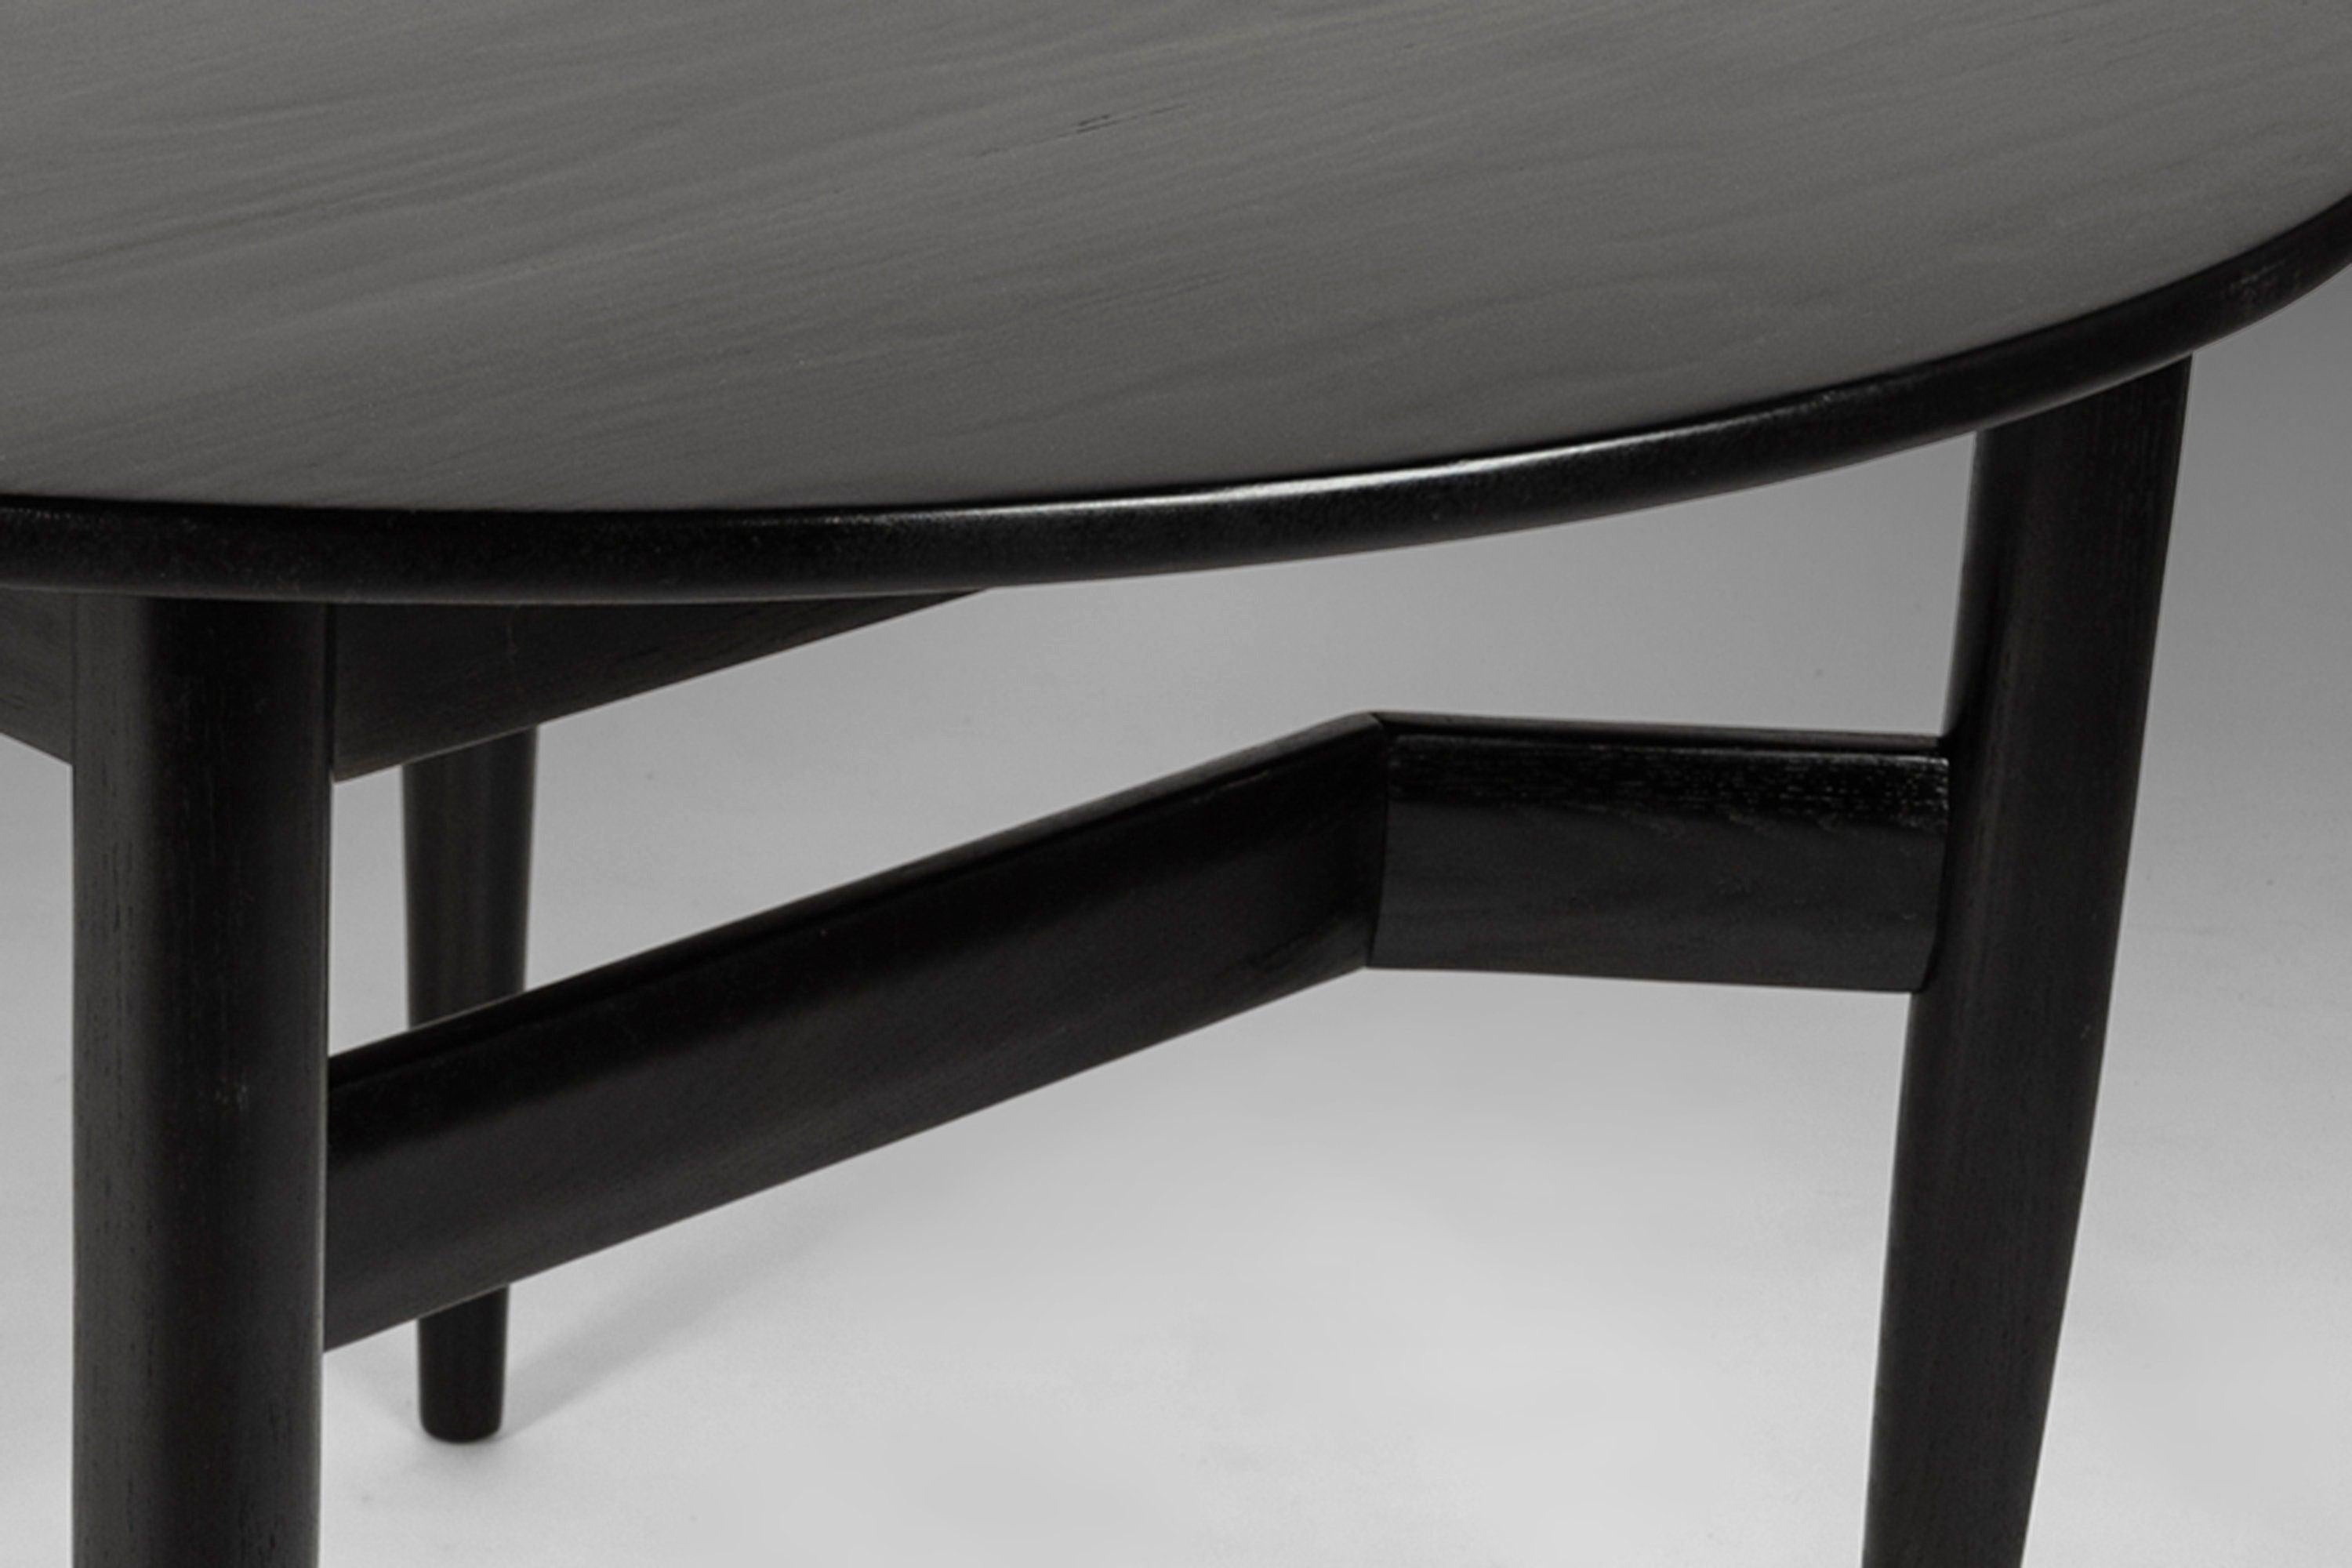 Walnut Mid-Century Ebonized Extension Dining Table w/ Architectural Leg Base, c. 1960's For Sale